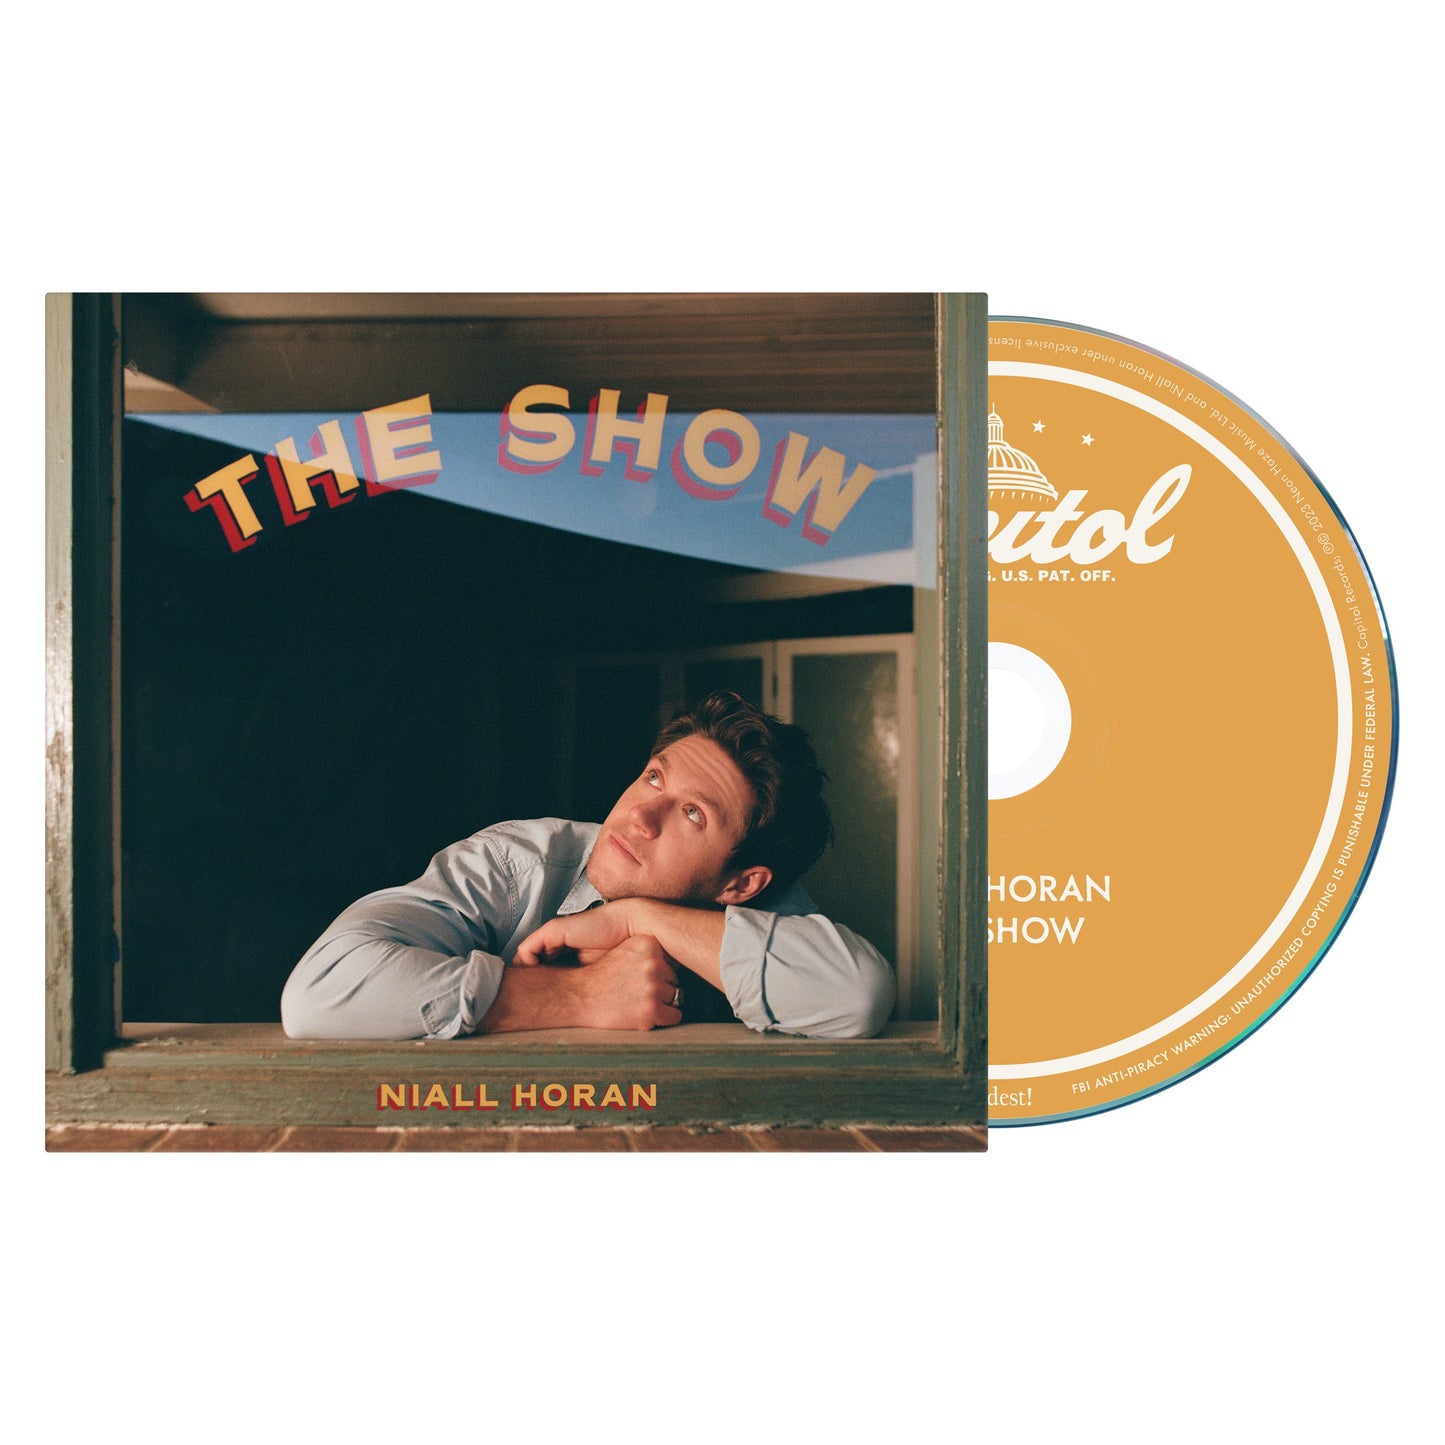 The Show - CD - Niall Horan